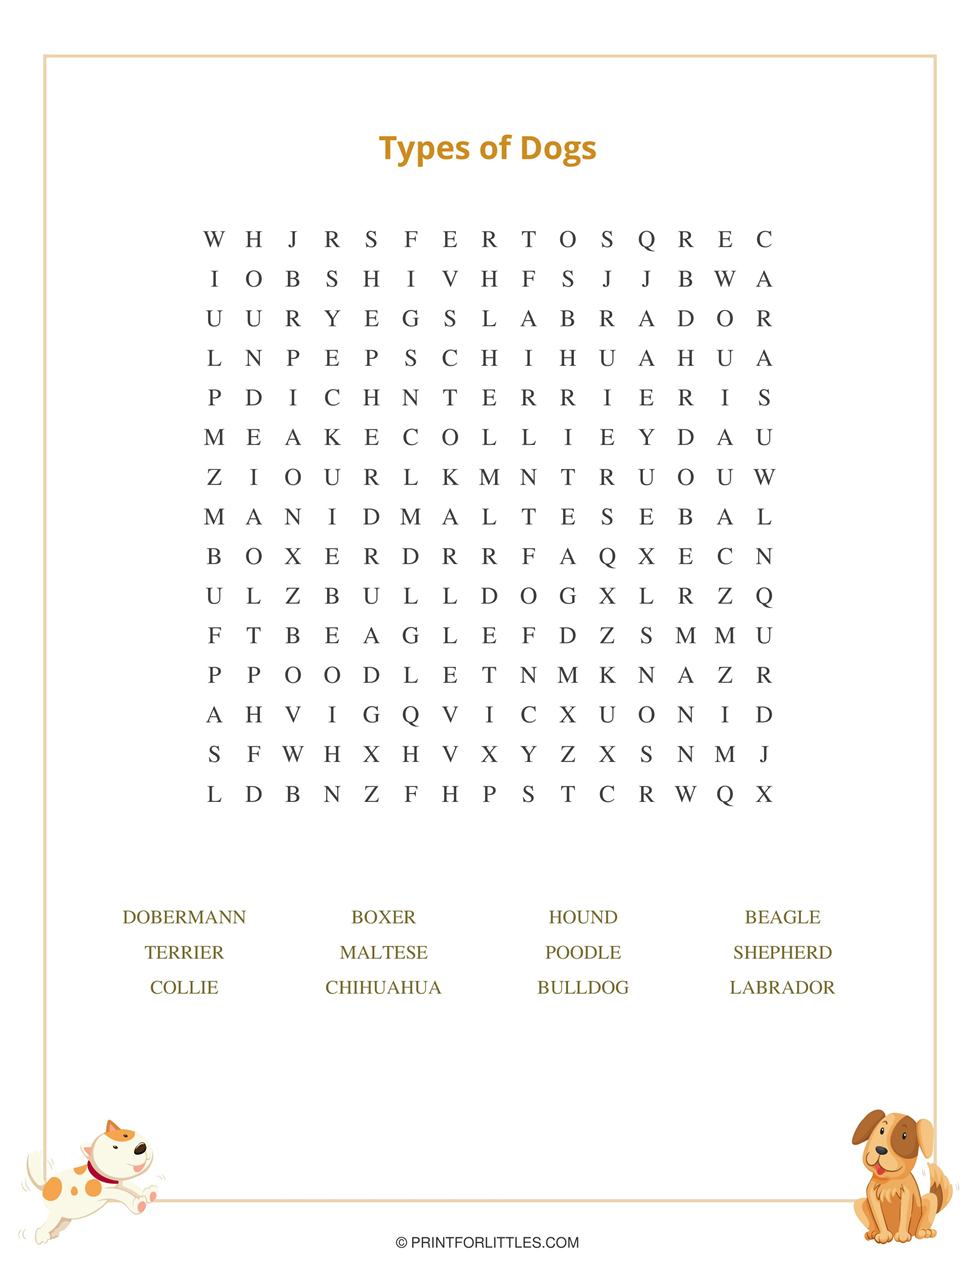 Types of Dogs Word Search Puzzle